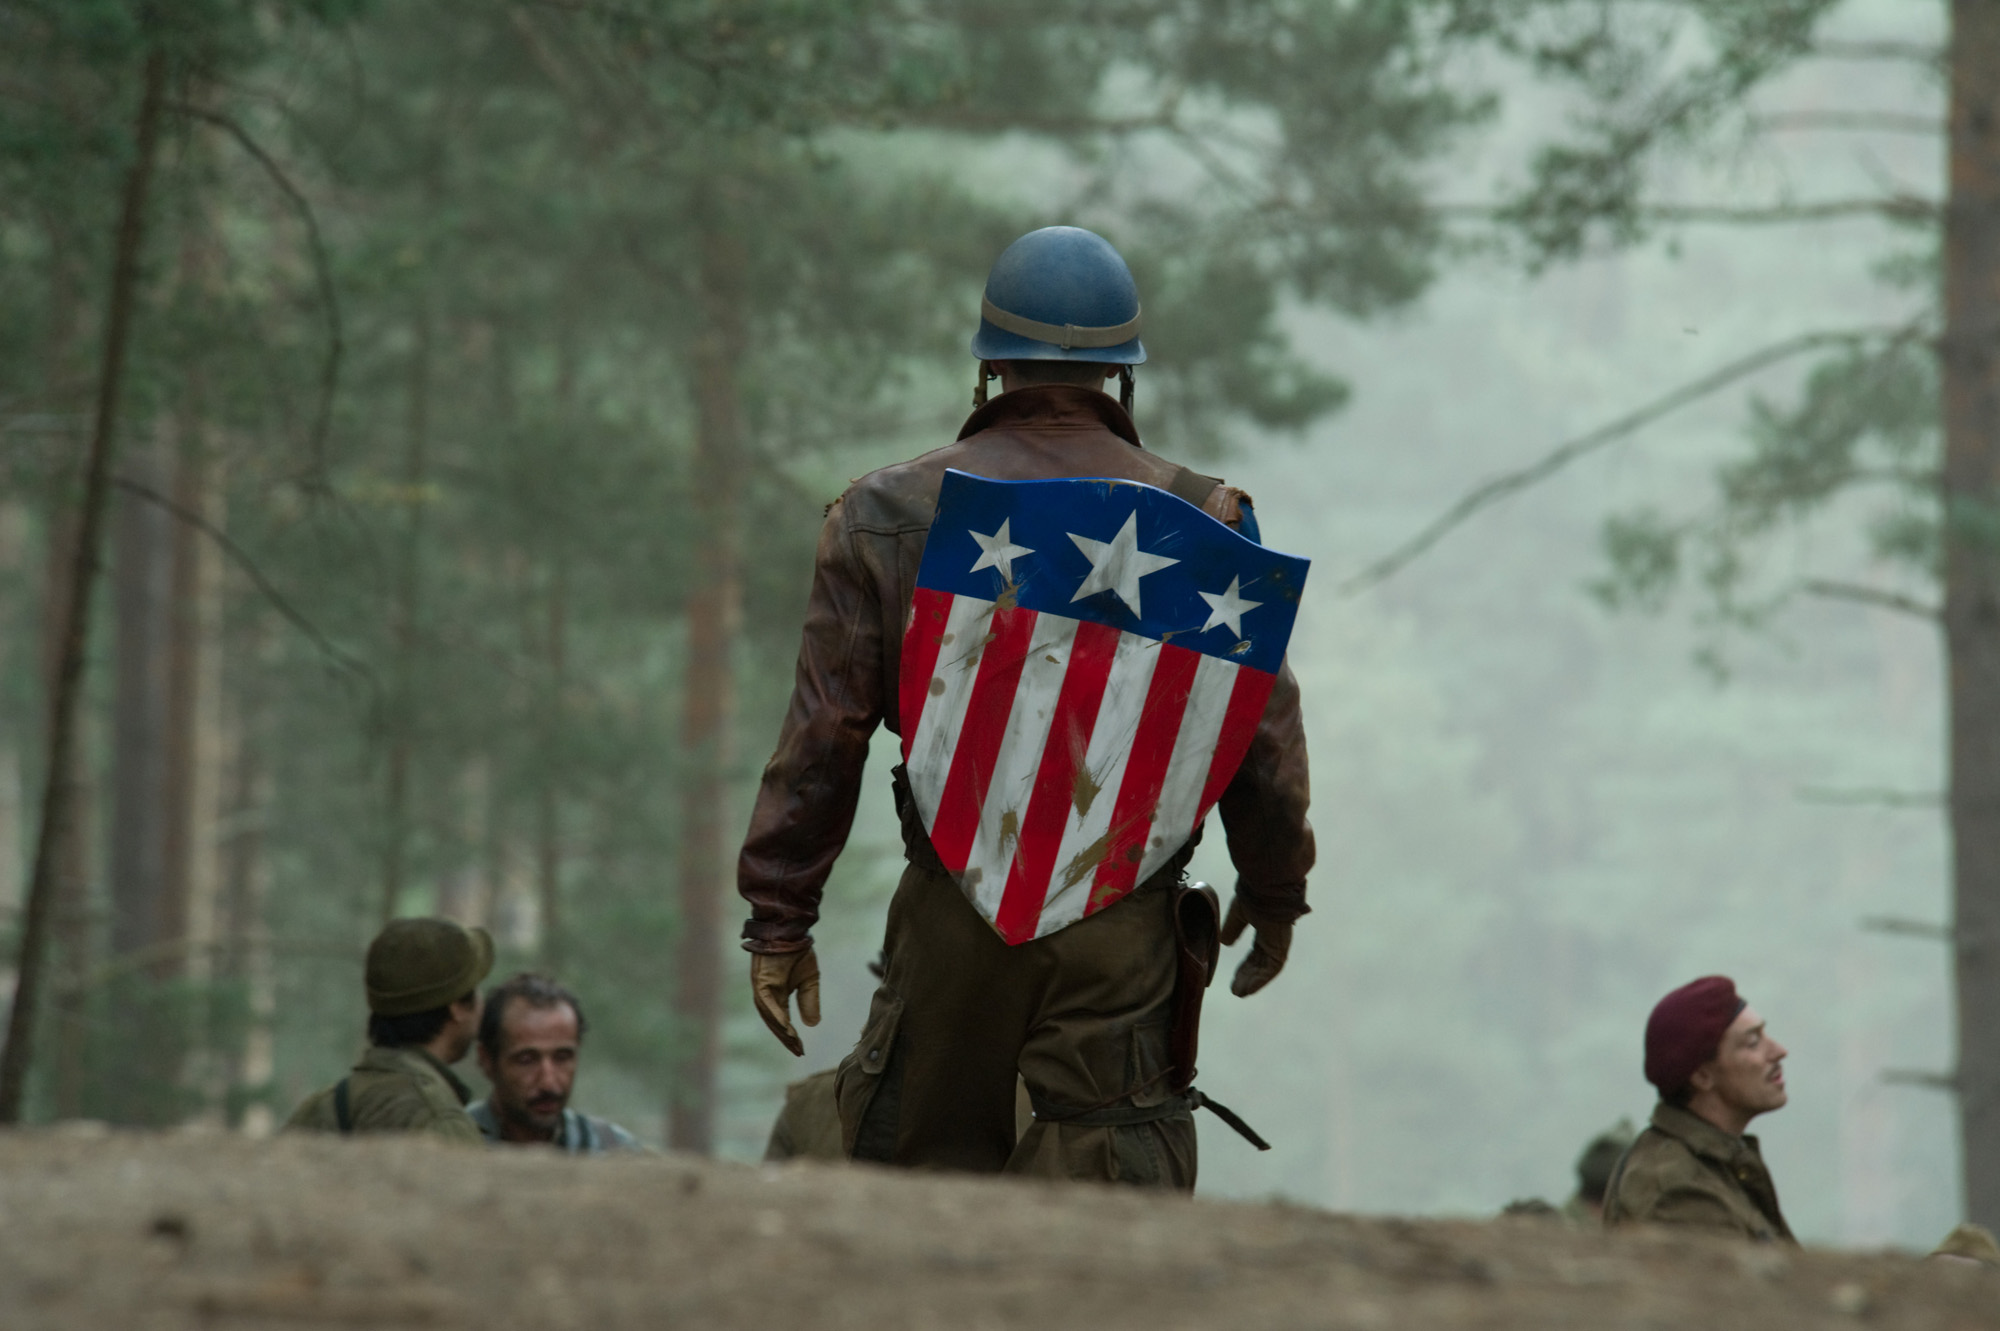 Captain-america-the-first-avenger-movie-image-65